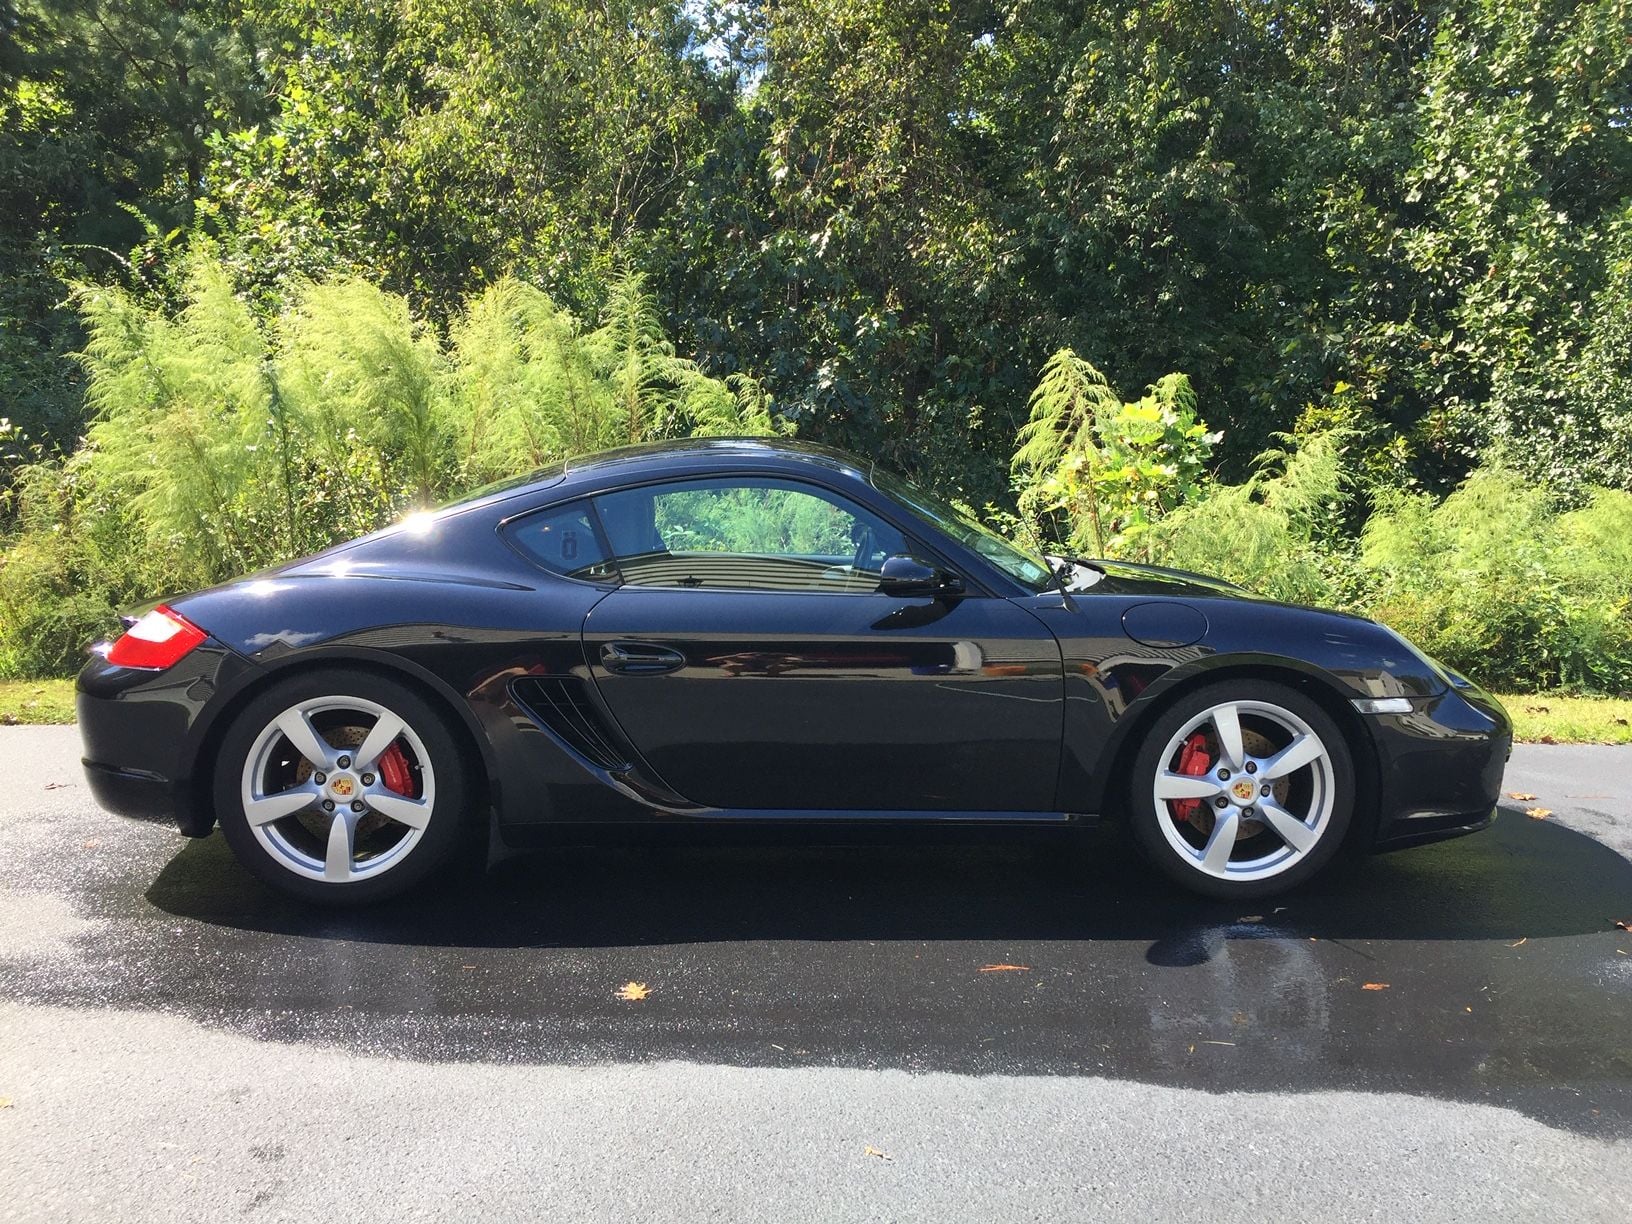 2006 Porsche Cayman - FS:  2006 Cayman S 6sp (non-running) - Used - VIN WP0AB29876U784777 - 117,052 Miles - 6 cyl - 2WD - Manual - Coupe - Black - Raleigh, NC 27603, United States